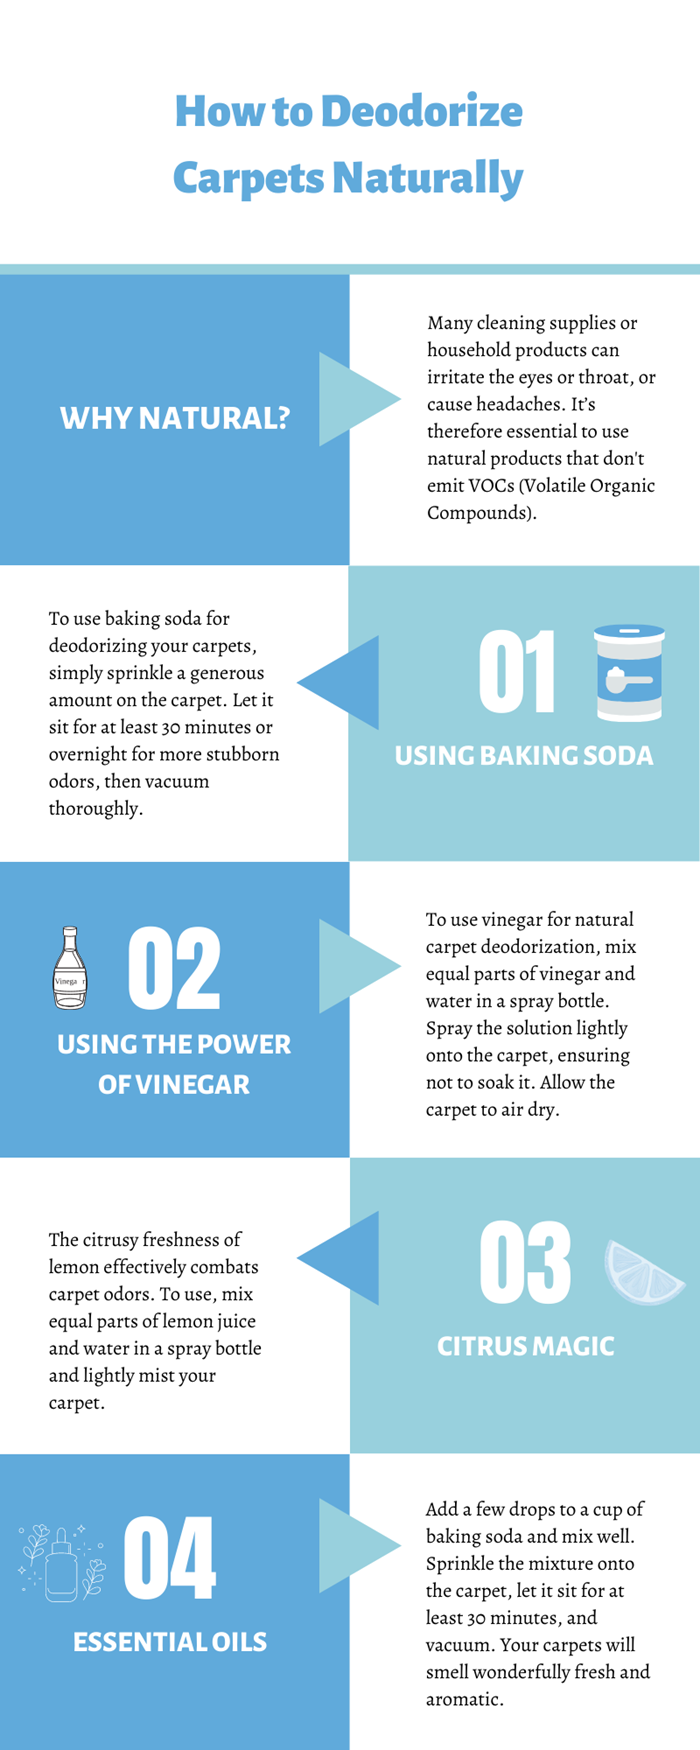 How to Deodorize Carpets Naturally